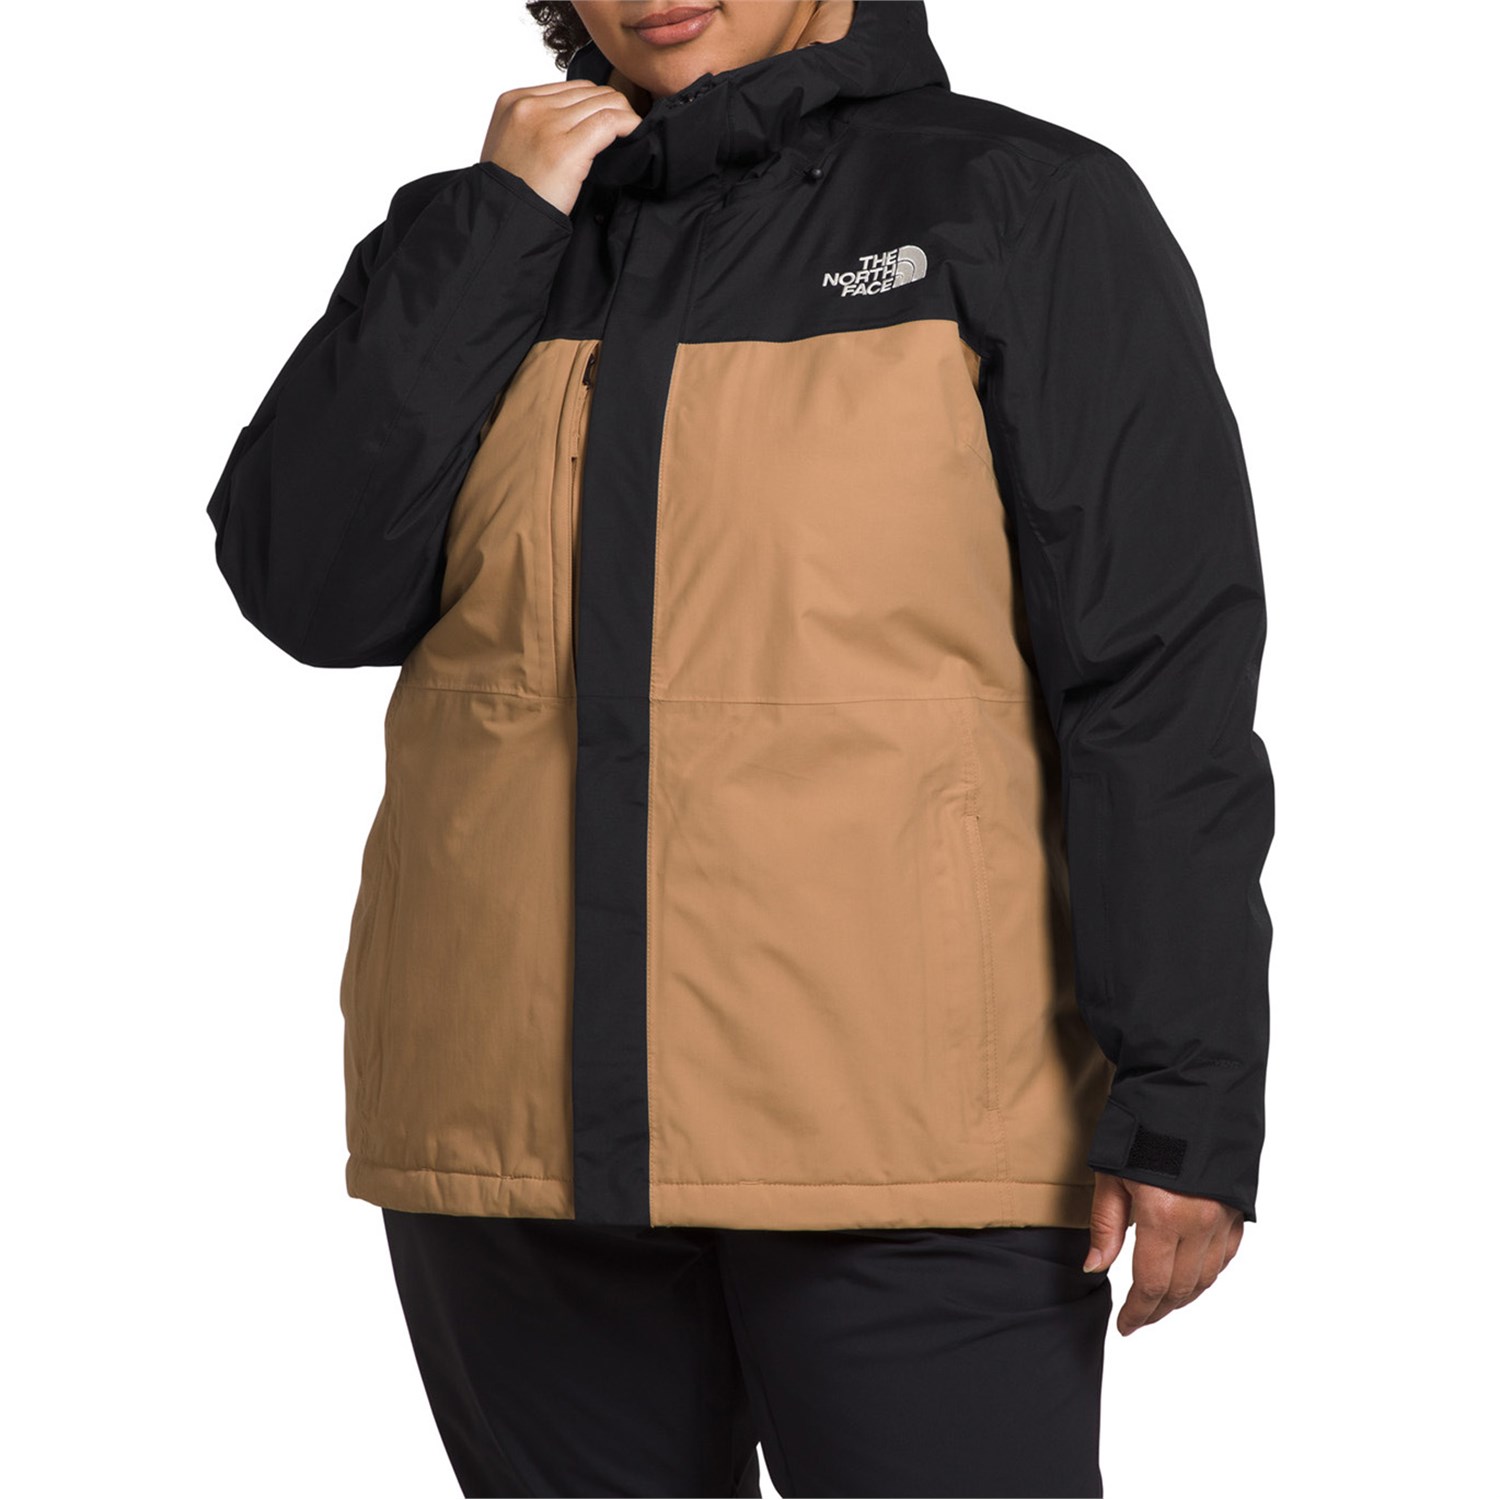 Куртка The North Face Freedom Insulated Plus, цвет TNF Black/Almond Butter куртка the north face freedom insulated черный